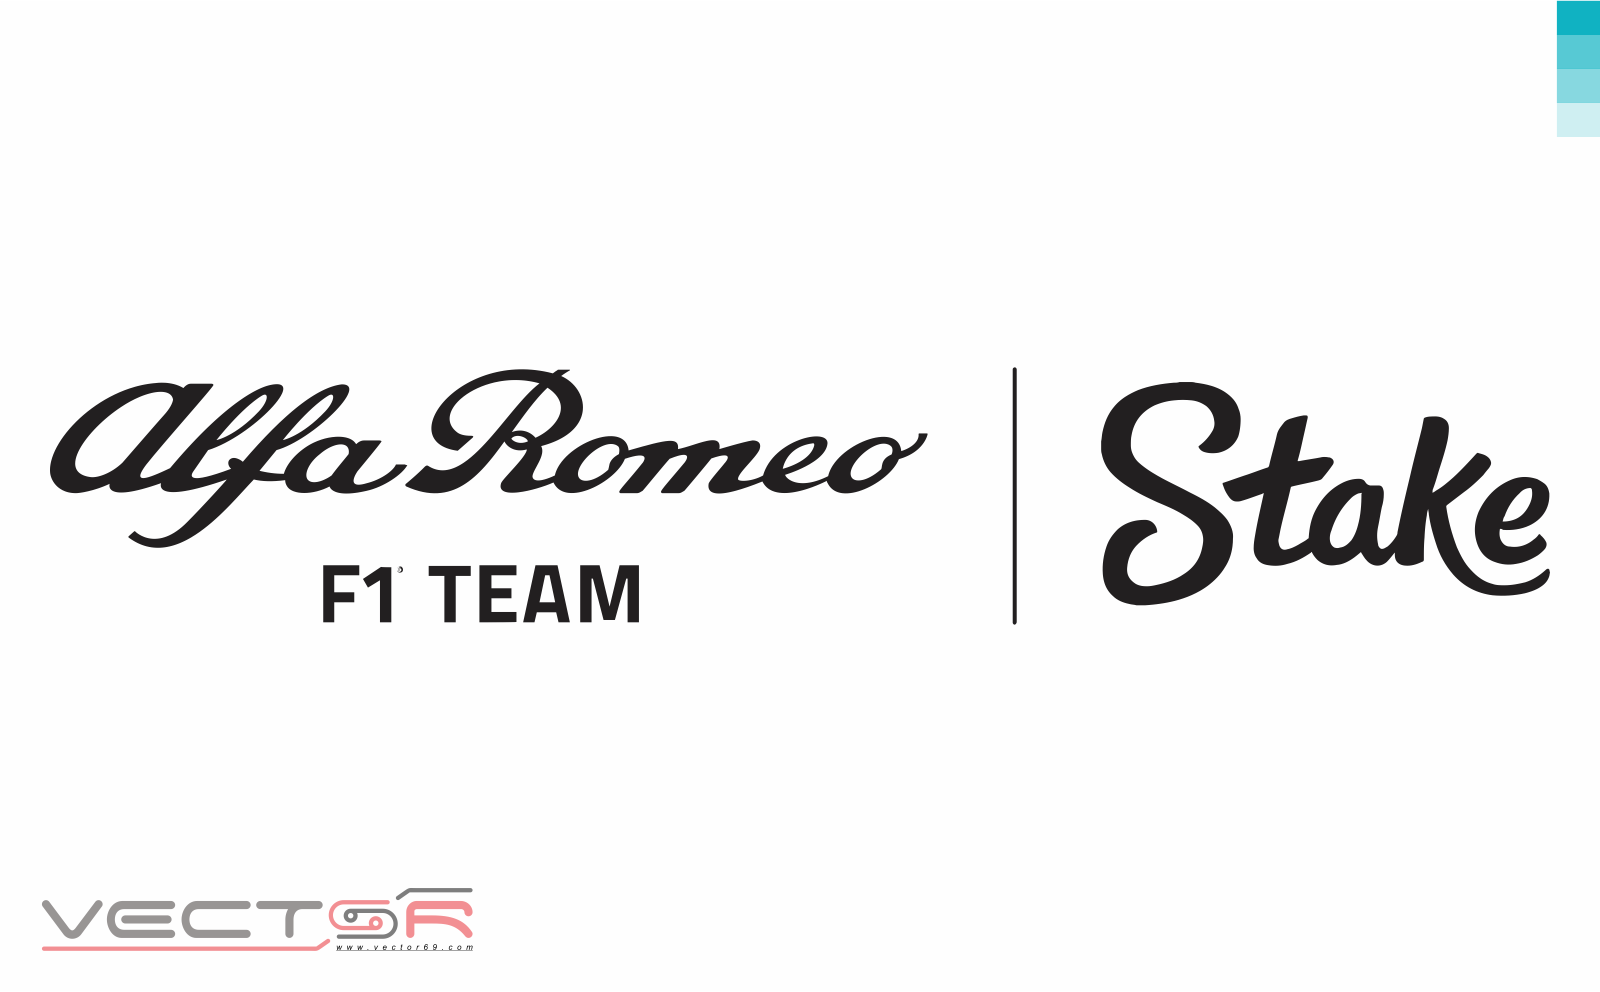 Alfa Romeo F1 Team Stake Logo - Download Vector File SVG (Scalable Vector Graphics)